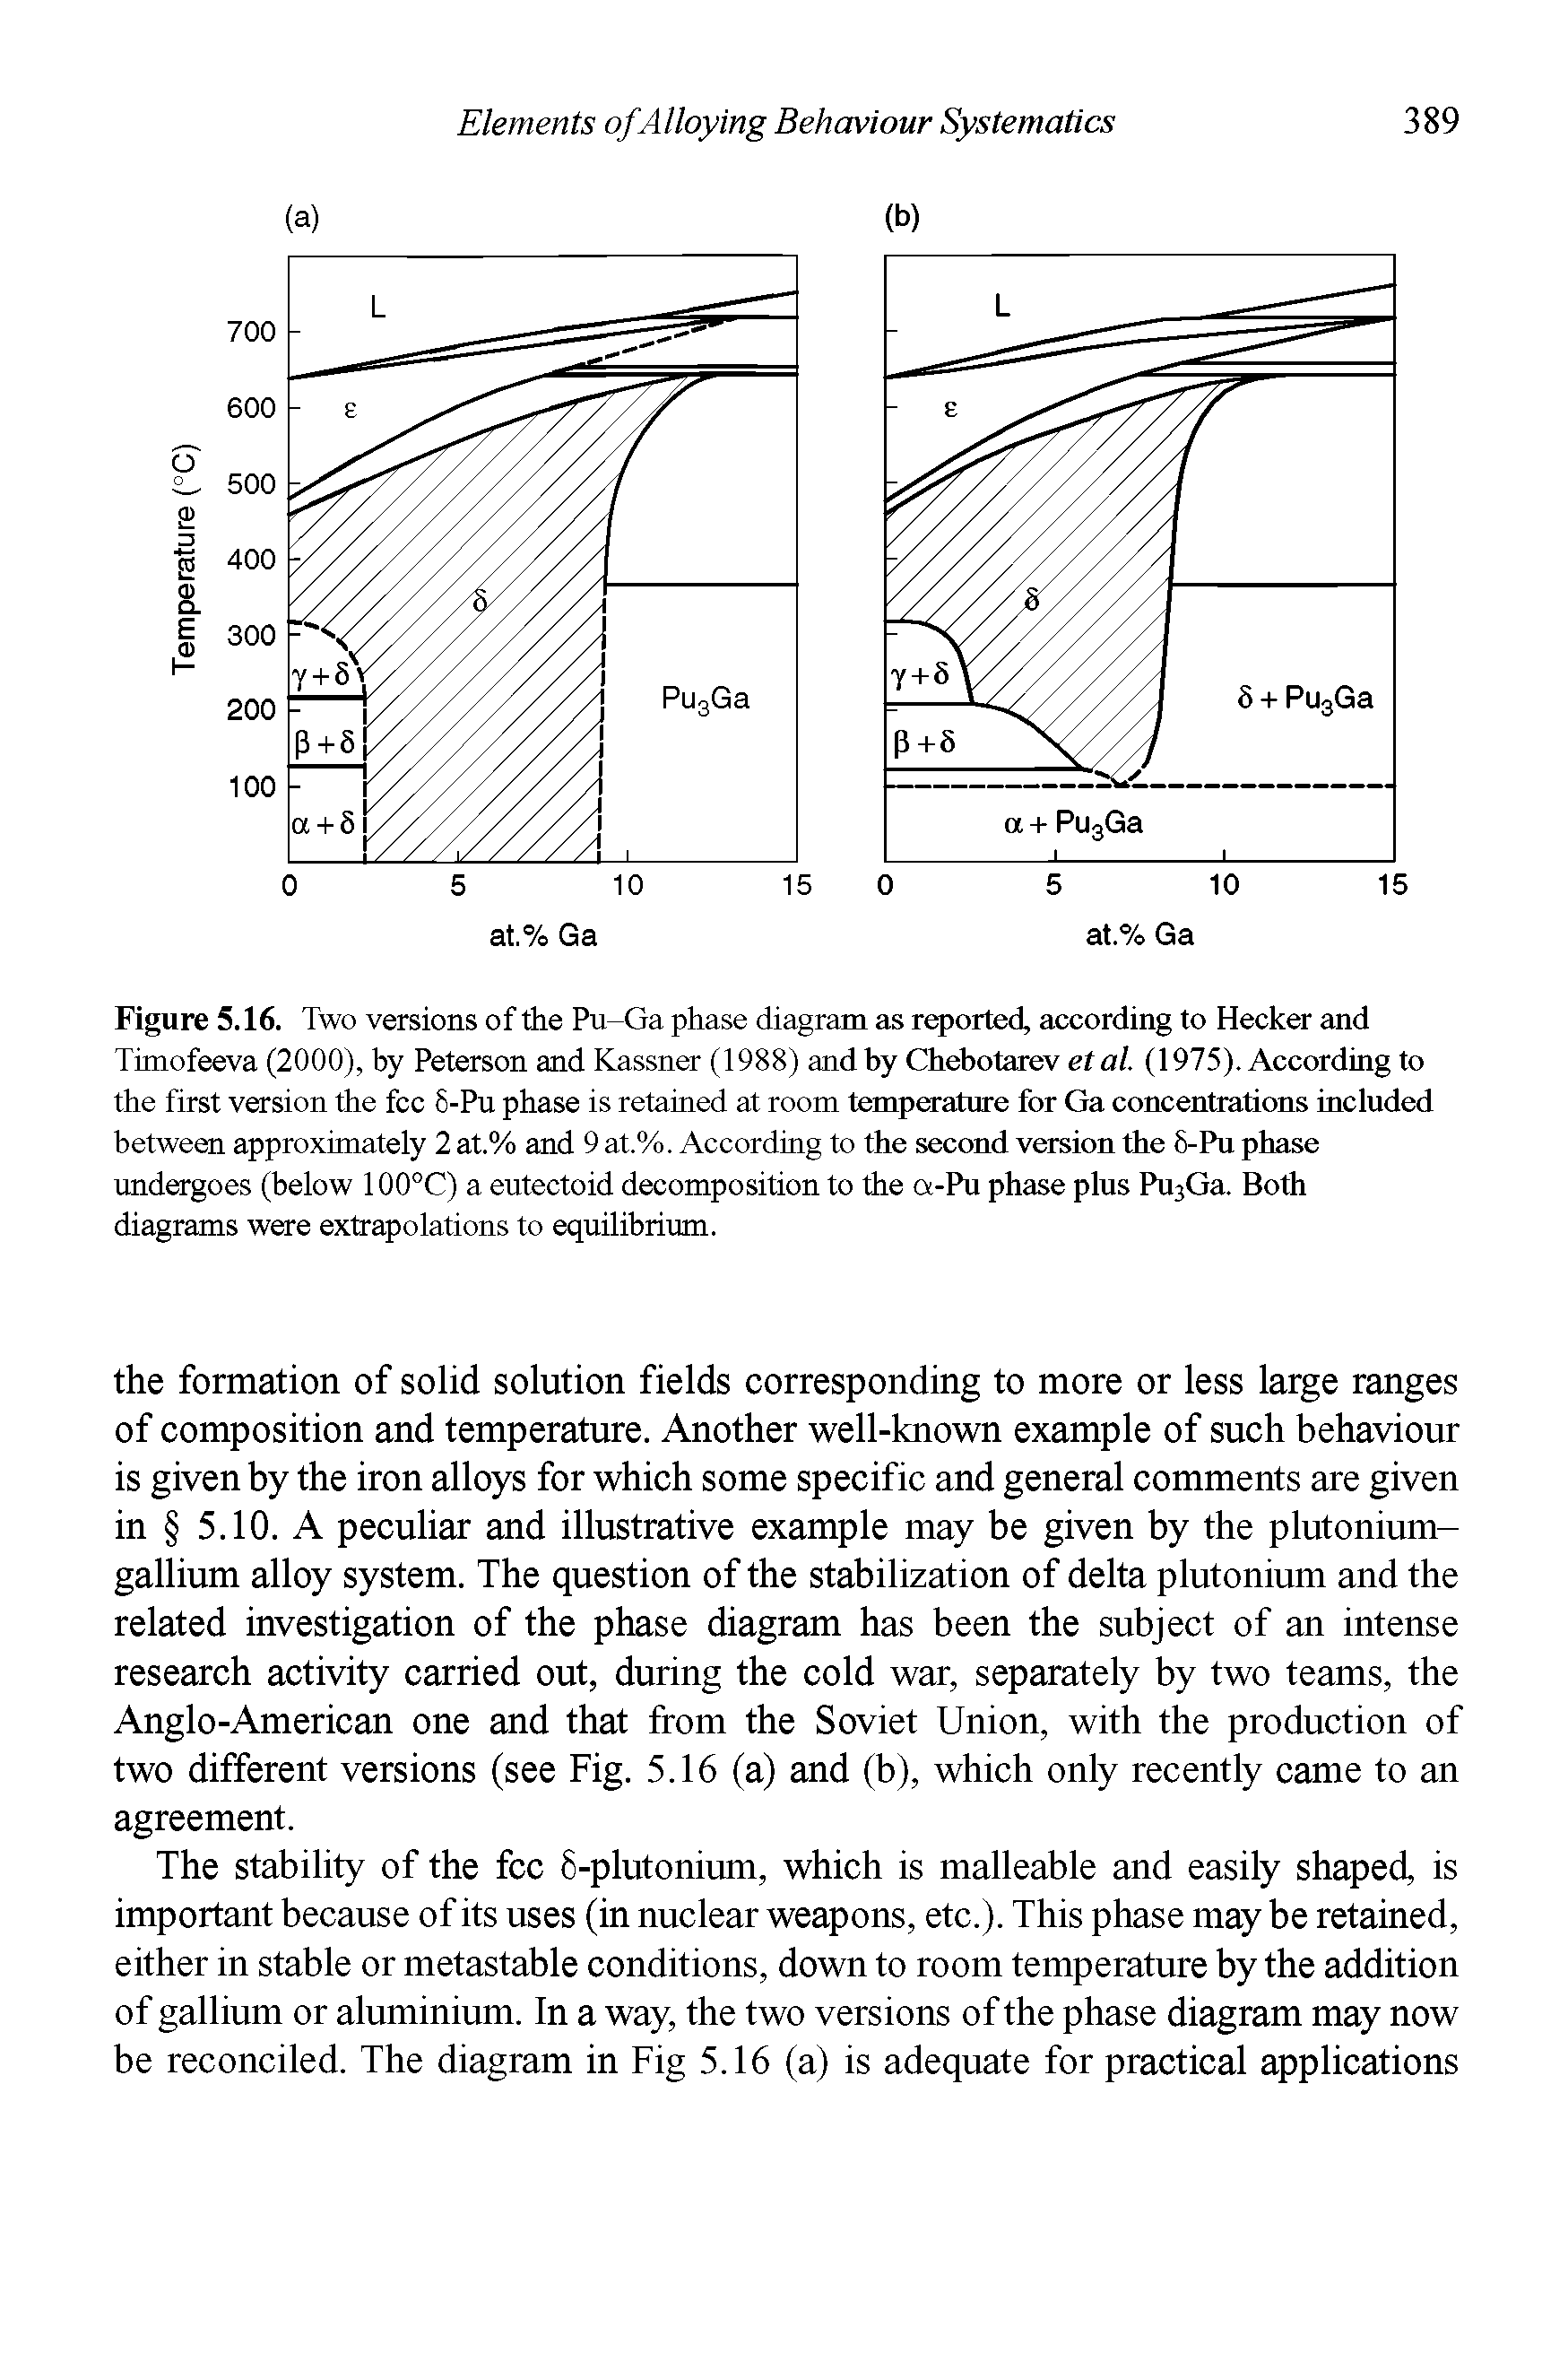 Figure 5.16. Two versions of the Pu-Ga phase diagram as reported, according to Hecker and Timofeeva (2000), by Peterson and Kassner (1988) and by Chebotarev etal. (1975). According to the first version the fee 6-Pu phase is retained at room temperature for Ga concentrations included between approximately 2 at.% and 9 at.%. According to the second version the S-Pu phase undergoes (below 100°C) a eutectoid decomposition to the a-Pu phase plus Pu3Ga. Both diagrams were extrapolations to equilibrium.